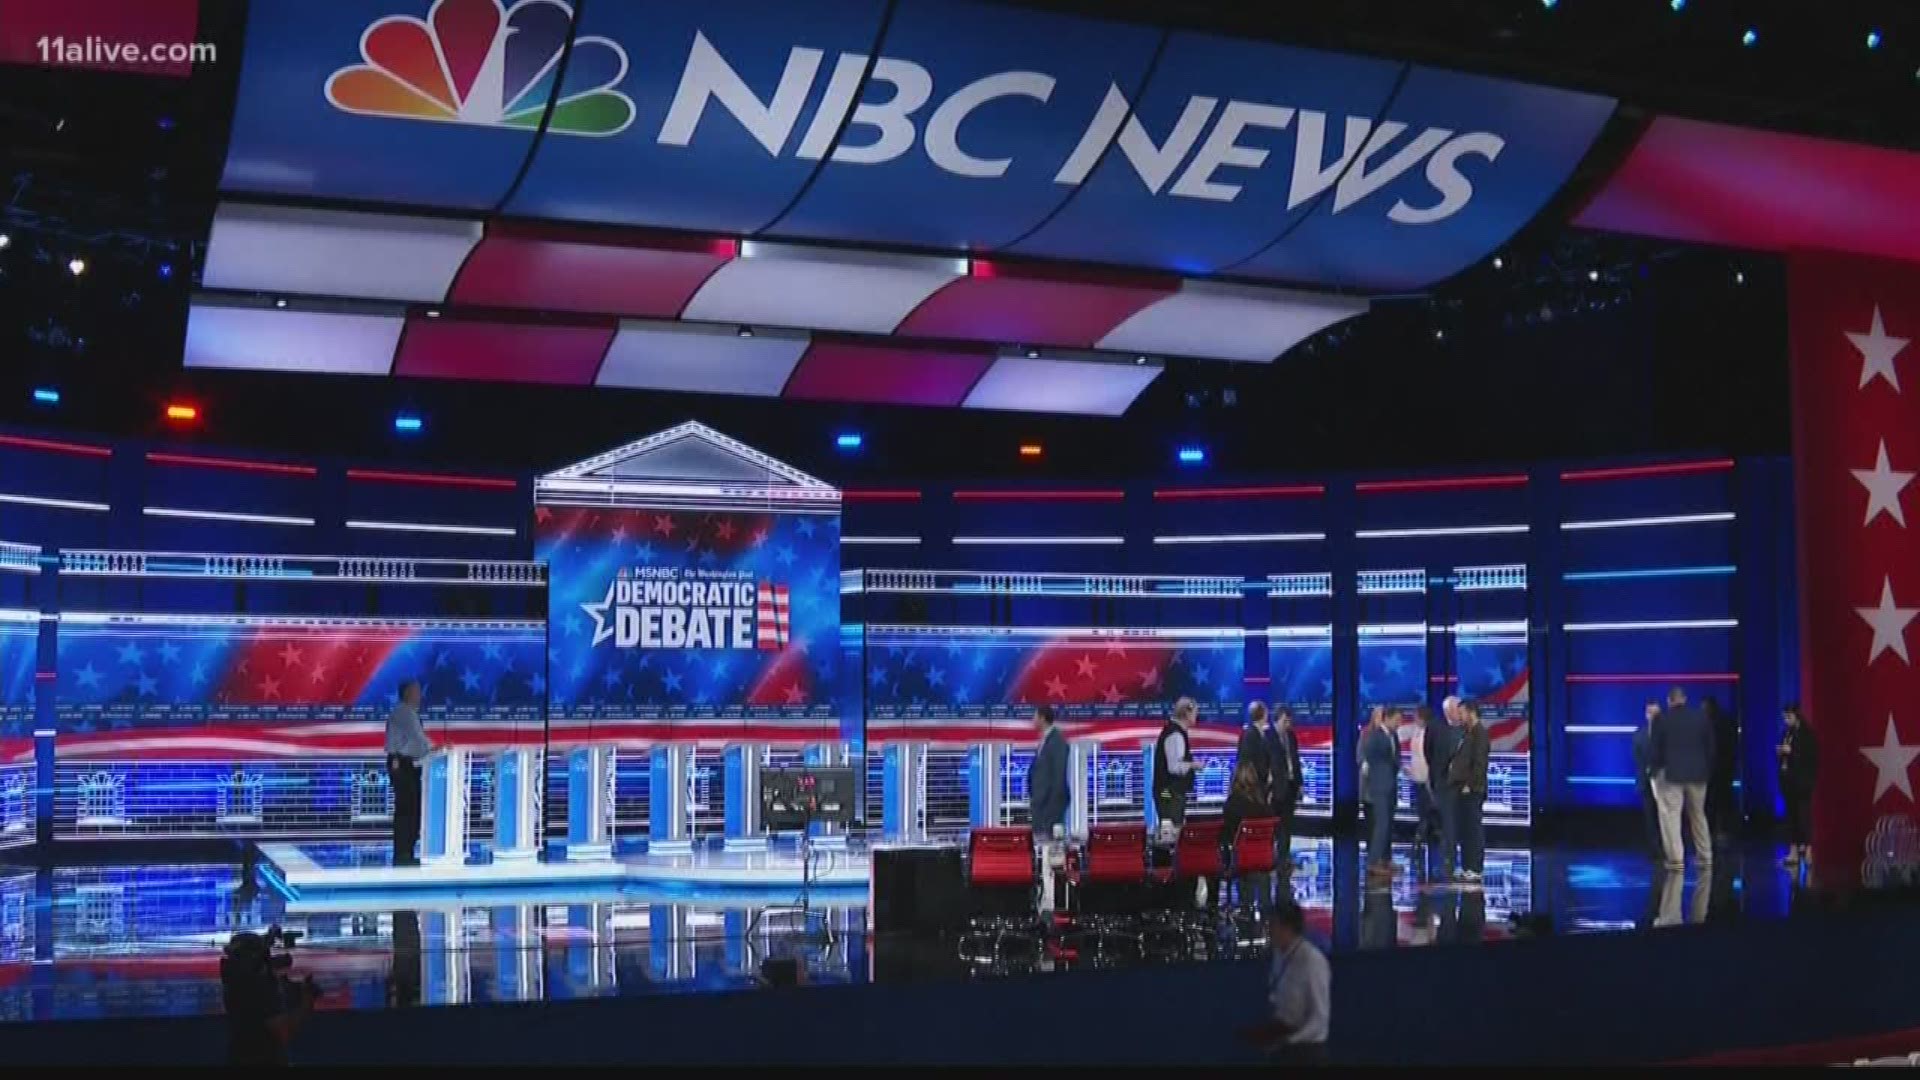 When the candidates hit the stage at Tyler Perry Studios on Wednesday evening, they'll be looking to prove themselves to a pivotal 2020 state.